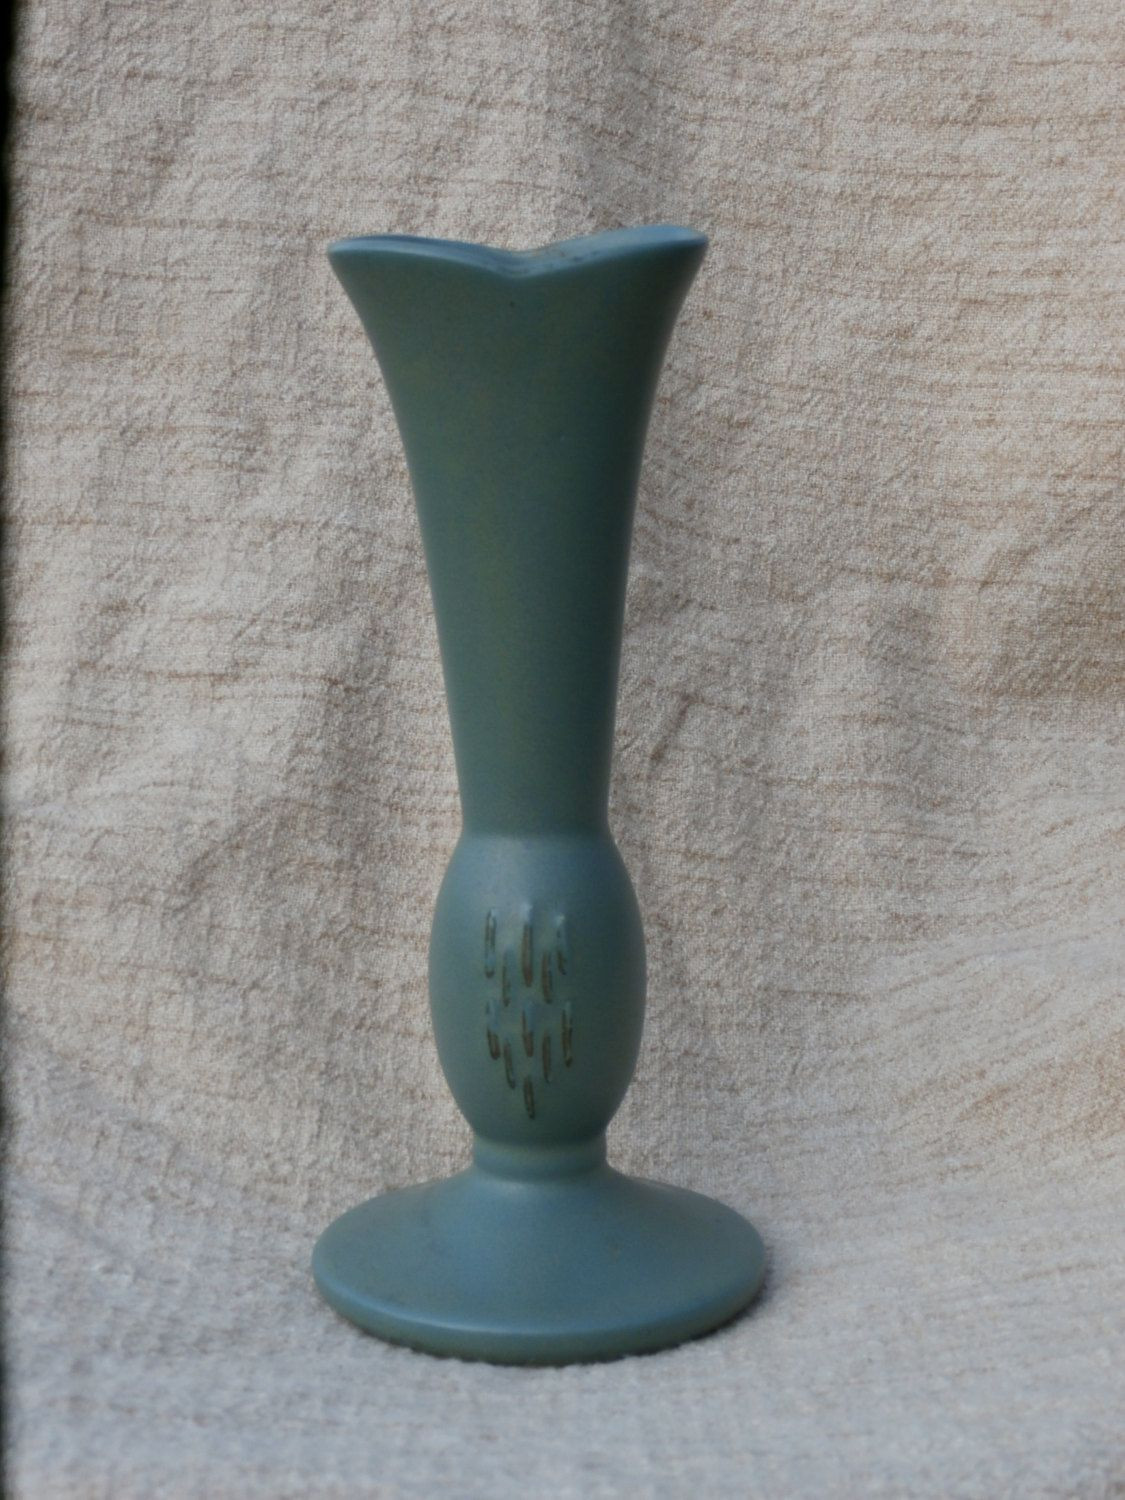 iridescent glass vases loetz of vintage green vase collection sage green pottery bud vase vintage within sage green pottery bud vase vintage unknown to me by